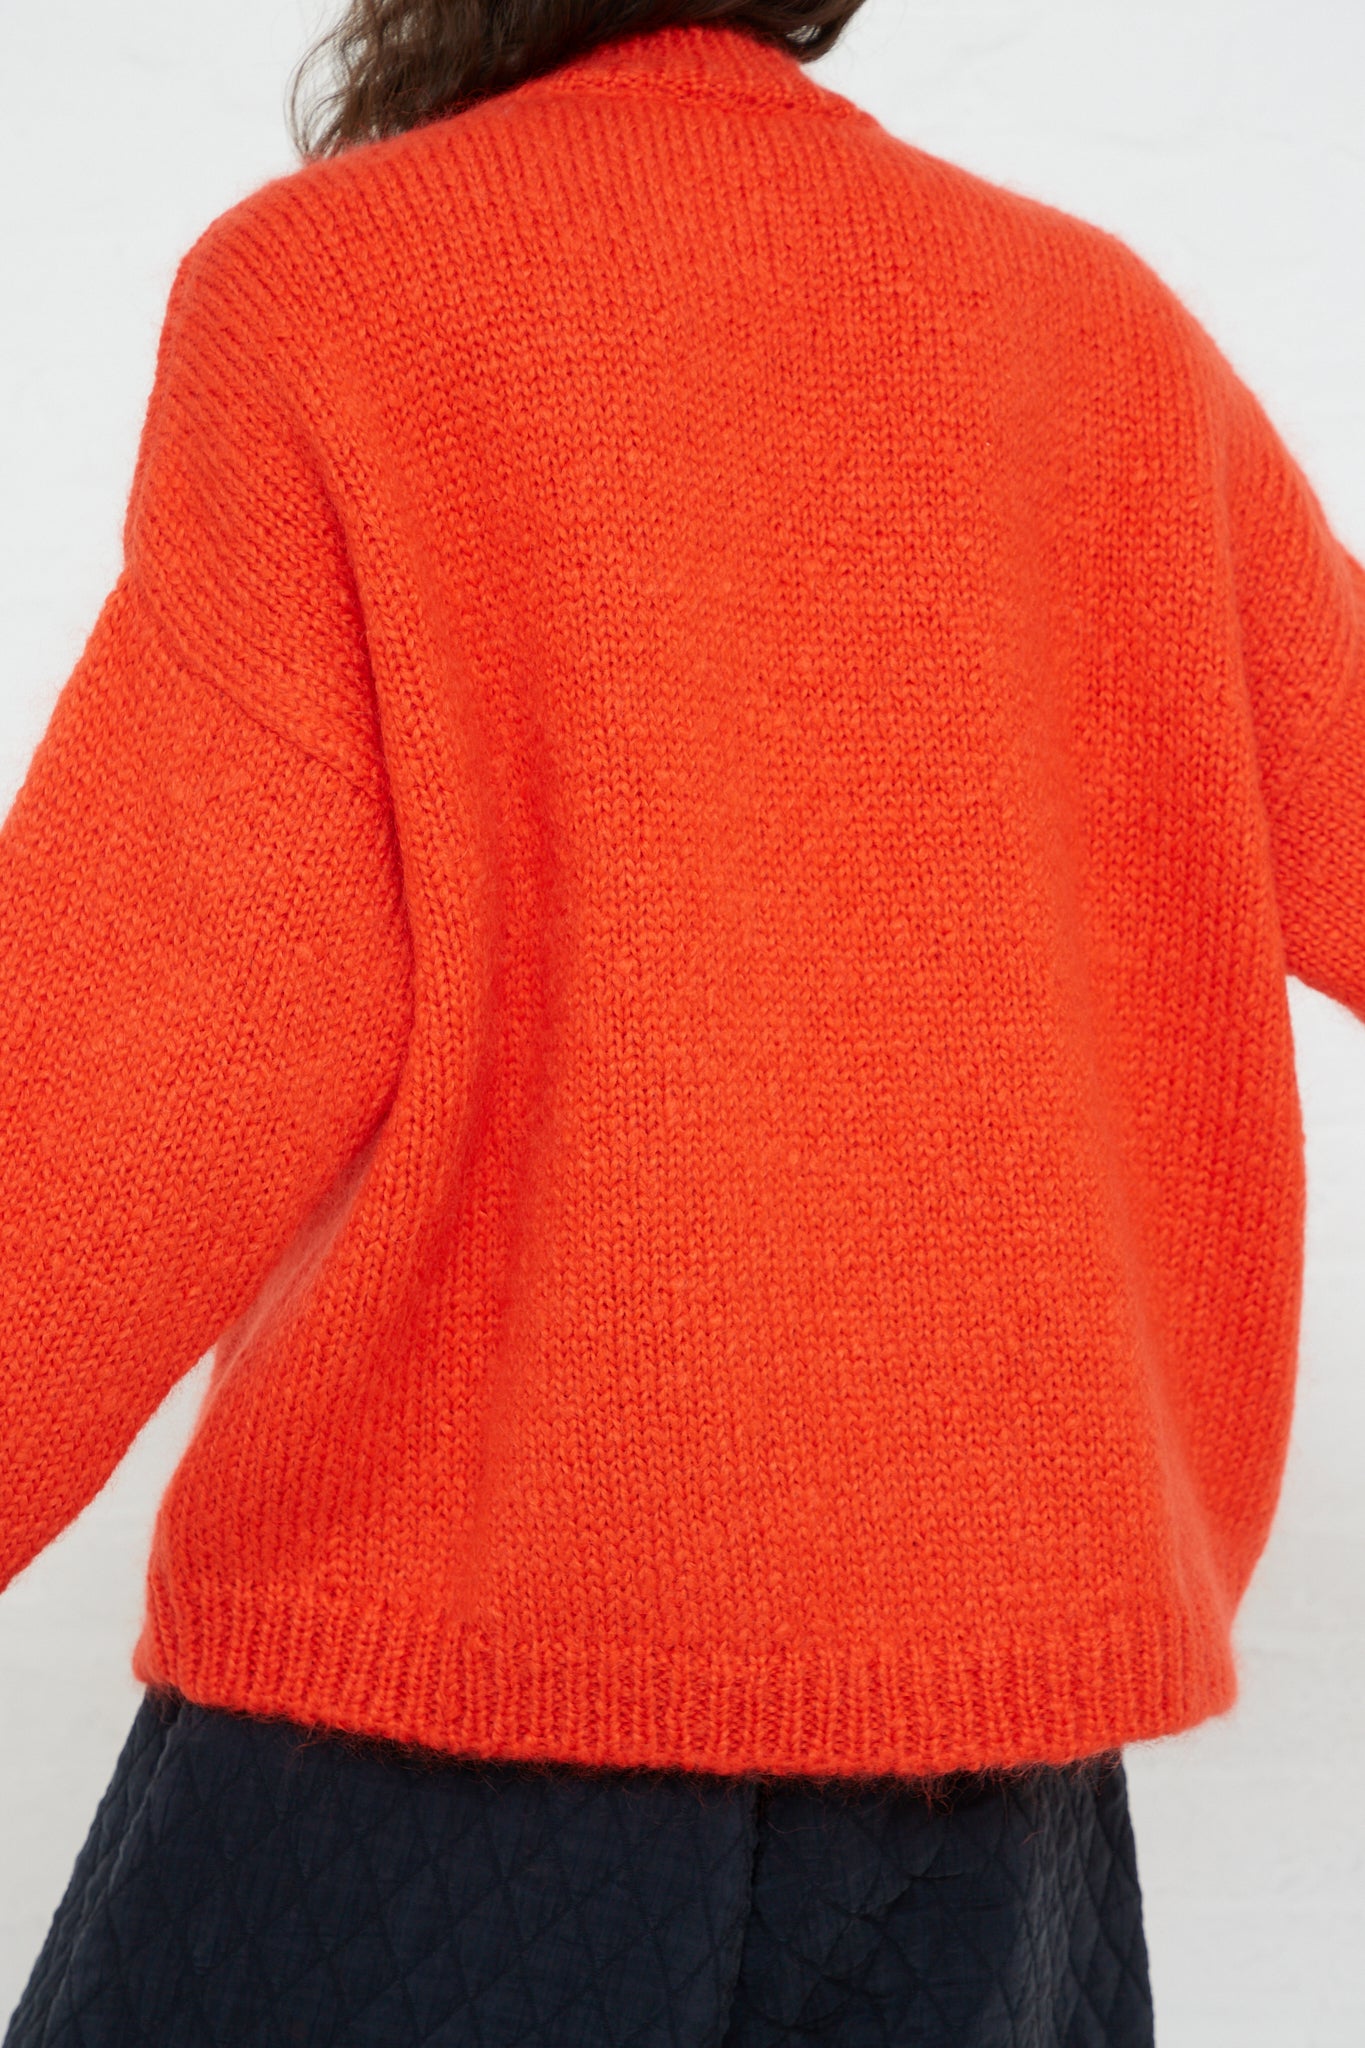 The back view of a woman wearing a Cordera Mohair Sweater in Tangerine.